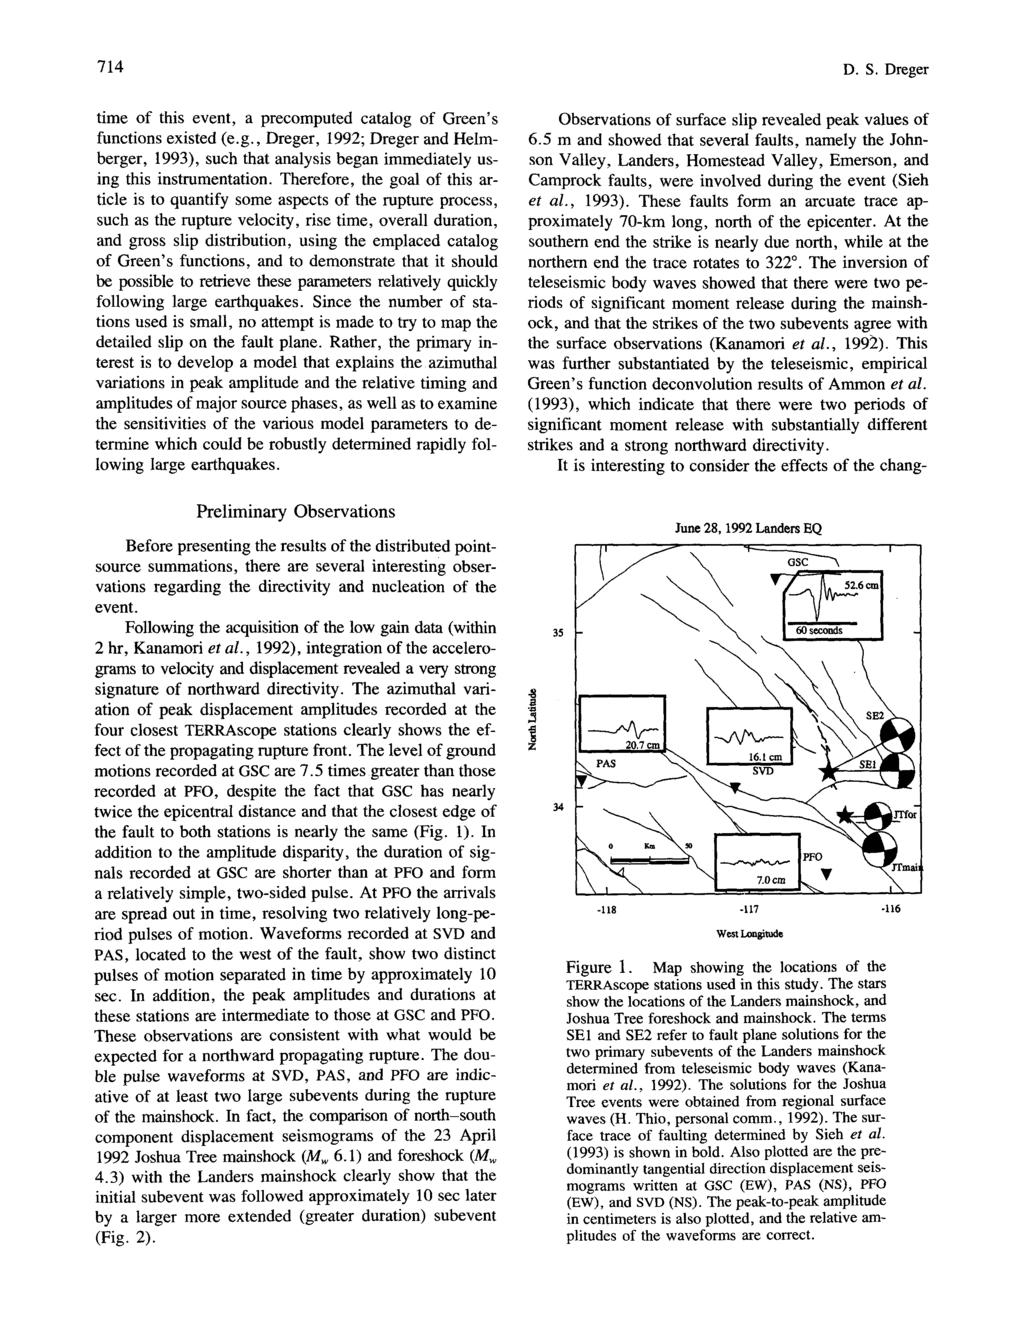 714 D.S. Dreger time of this event, a precomputed catalog of Green's functions existed (e.g., Dreger, 1992; Dreger and Helmberger, 1993), such that analysis began immediately using this instrumentation.